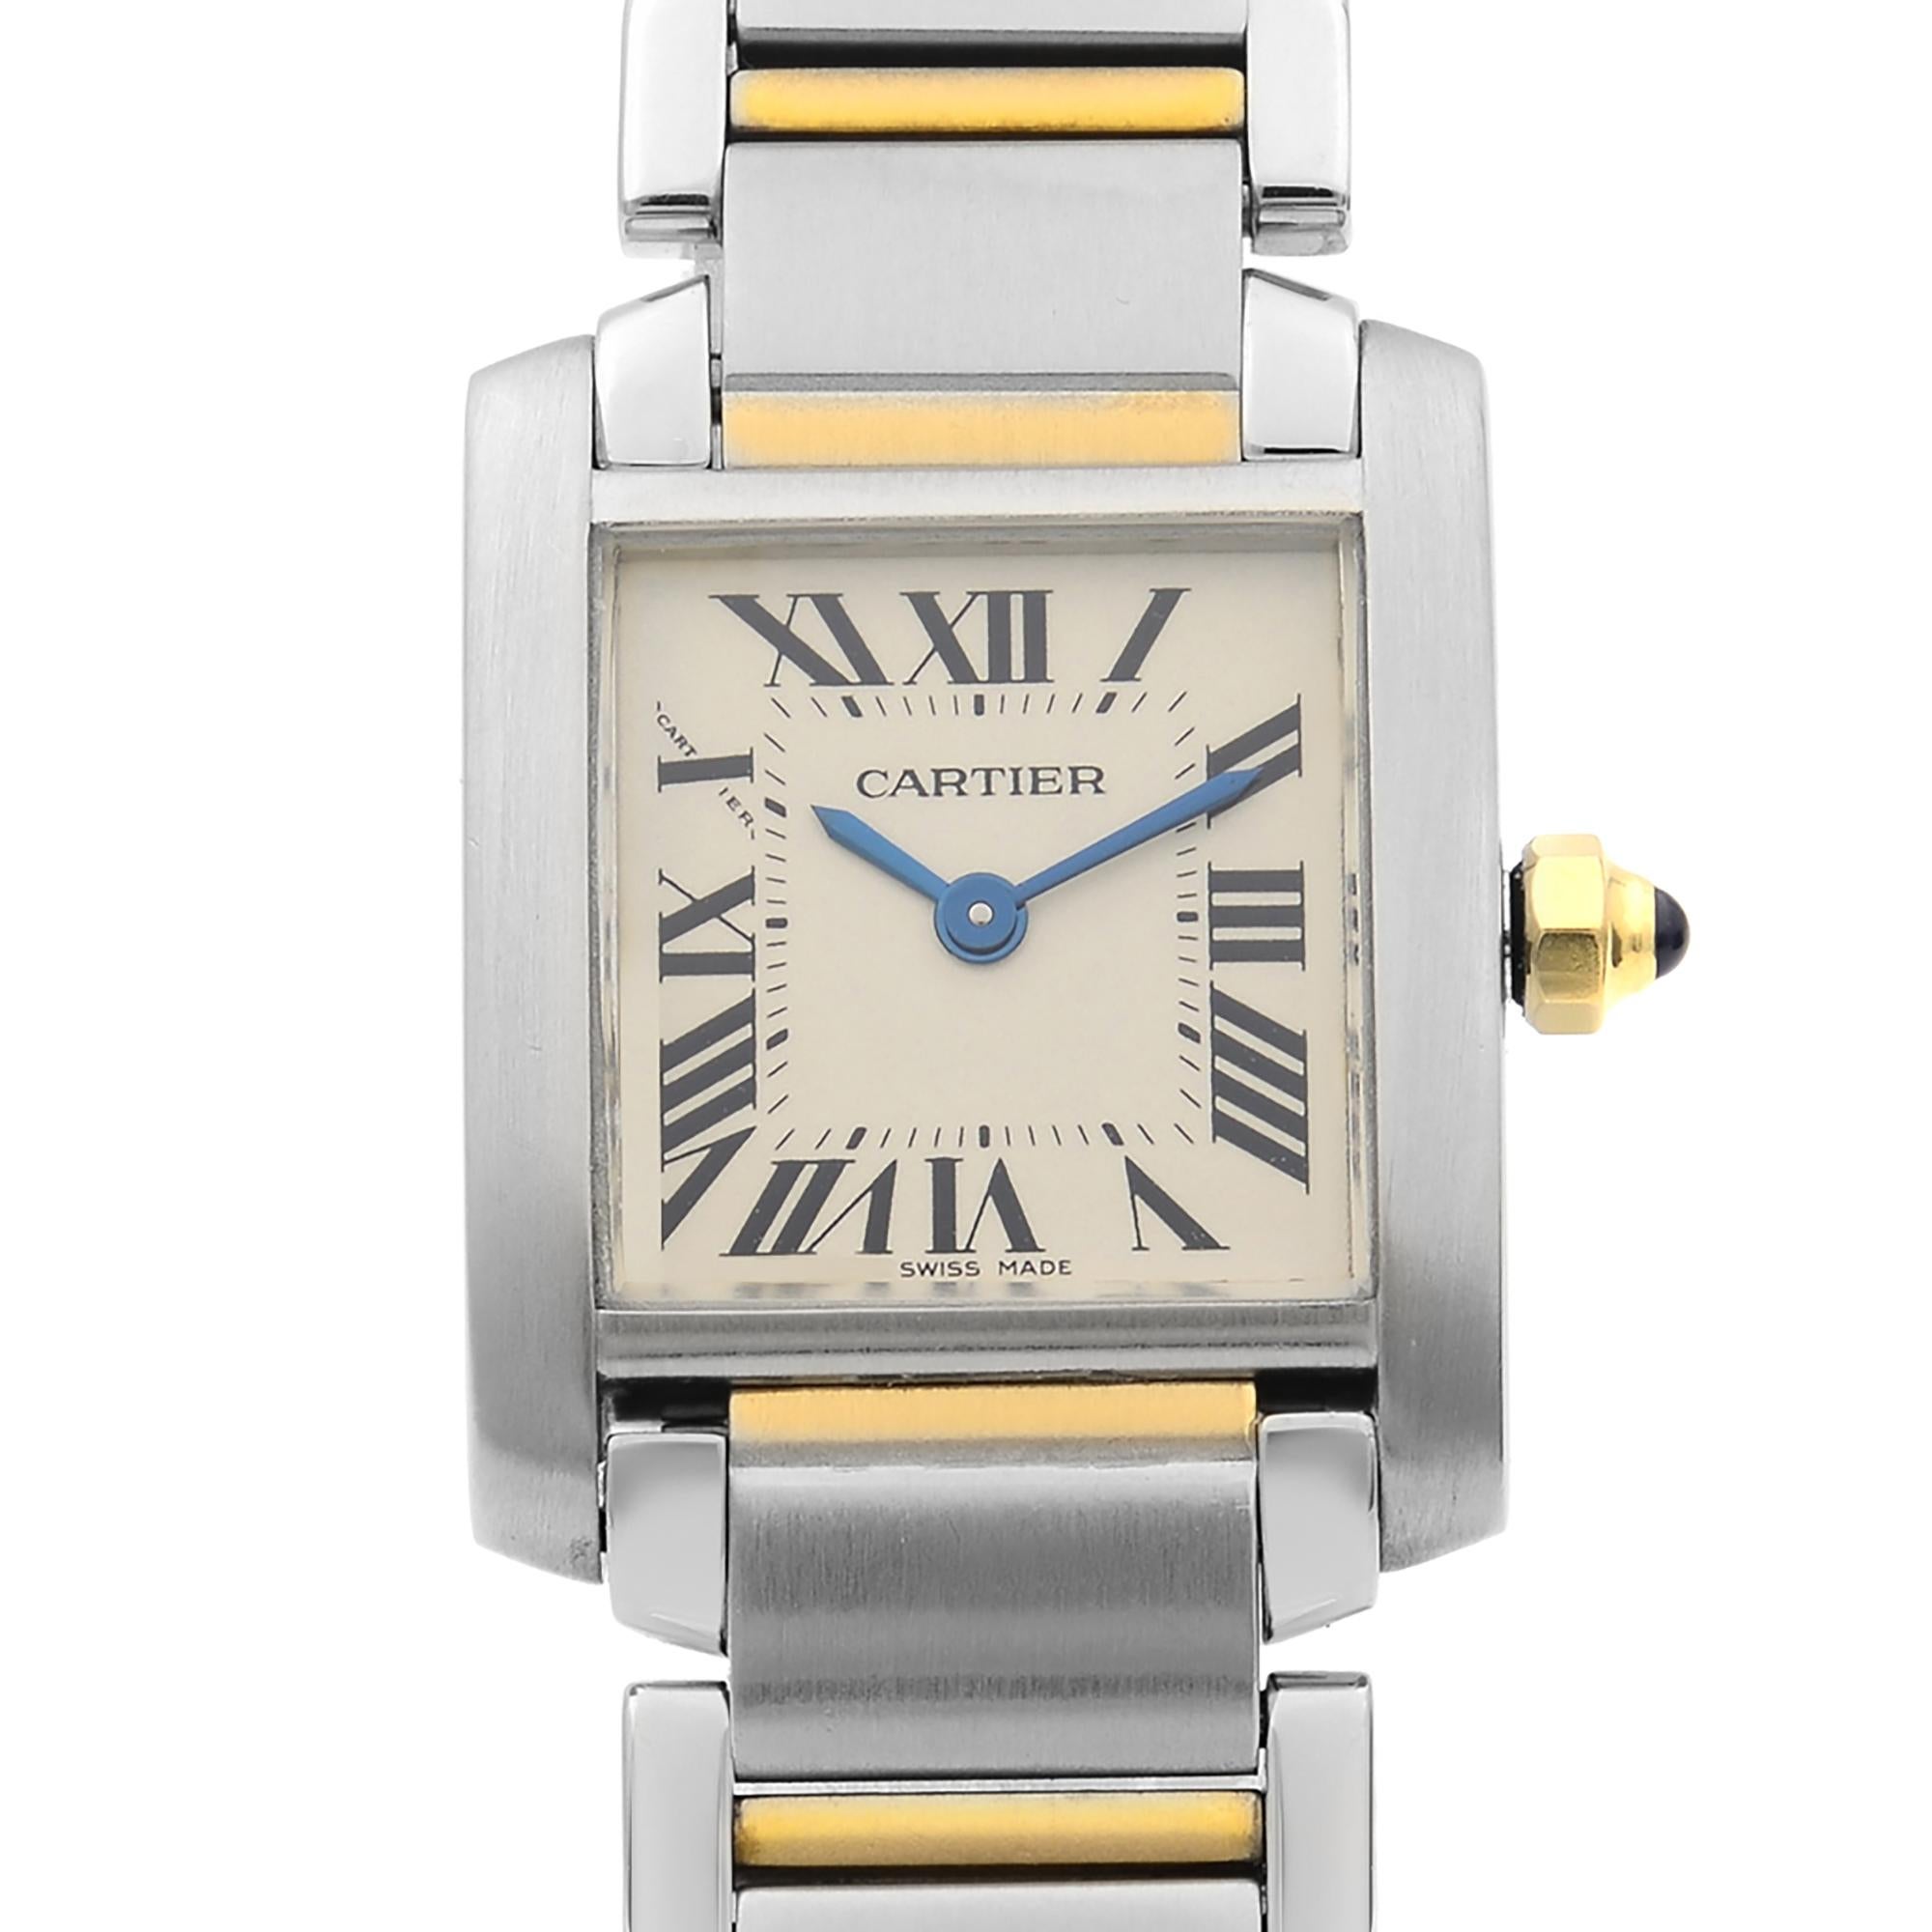 Pre Owned Cartier Tank Francaise Steel Gold White Roman Dial Ladies Quartz Watch W51007Q4. This Beautiful Timepiece is Powered by Quartz (Battery) Movement And Features: Stainless Steel Case with a Two-Tone (Stainless Steel & Gold) Bracelet, Fixed